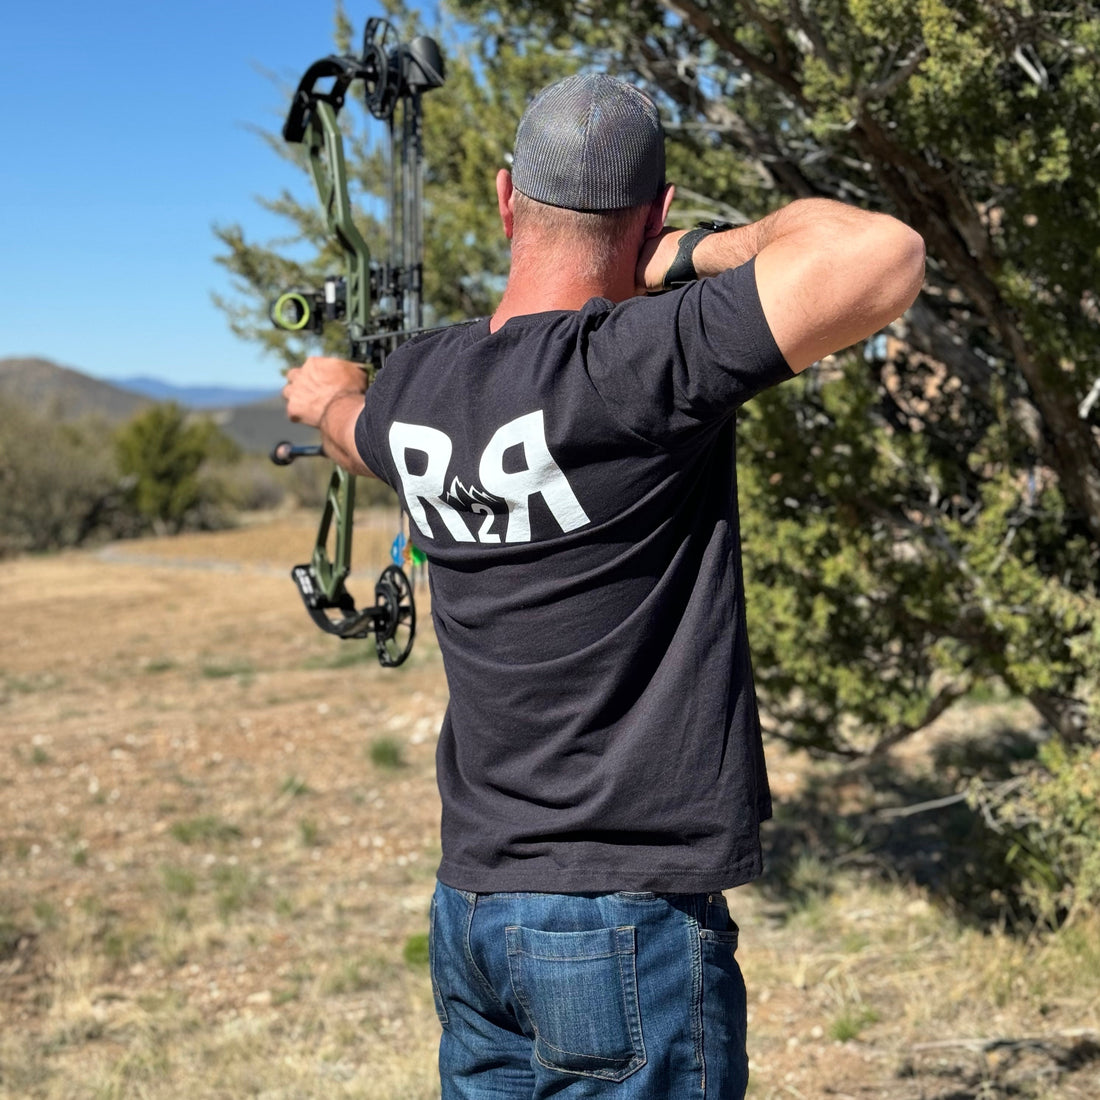  Man shooting a compound bow and arrow in jeans and a R2R T shirt from River to Ridge Clothing Brand